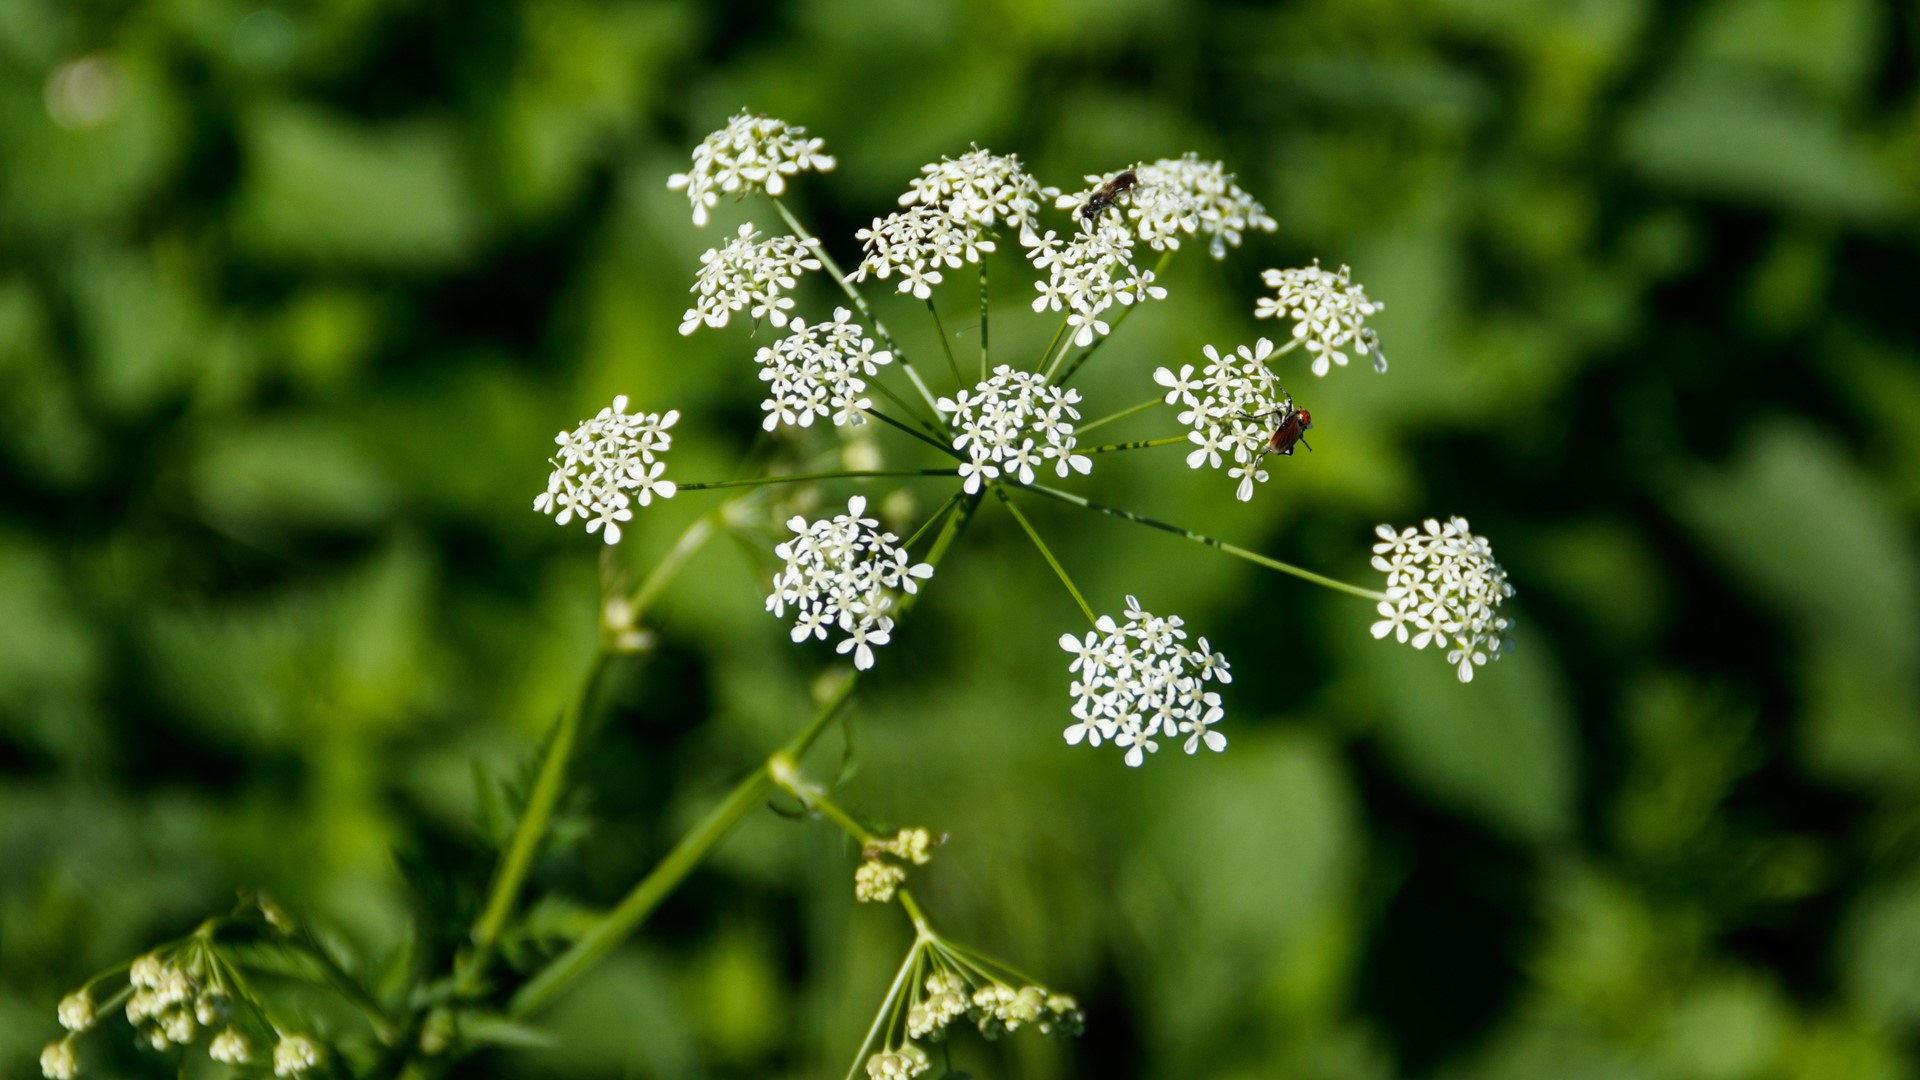 The Dallas parks department says the water hemlock is growing in areas where residents can accidentally come into contact with it.